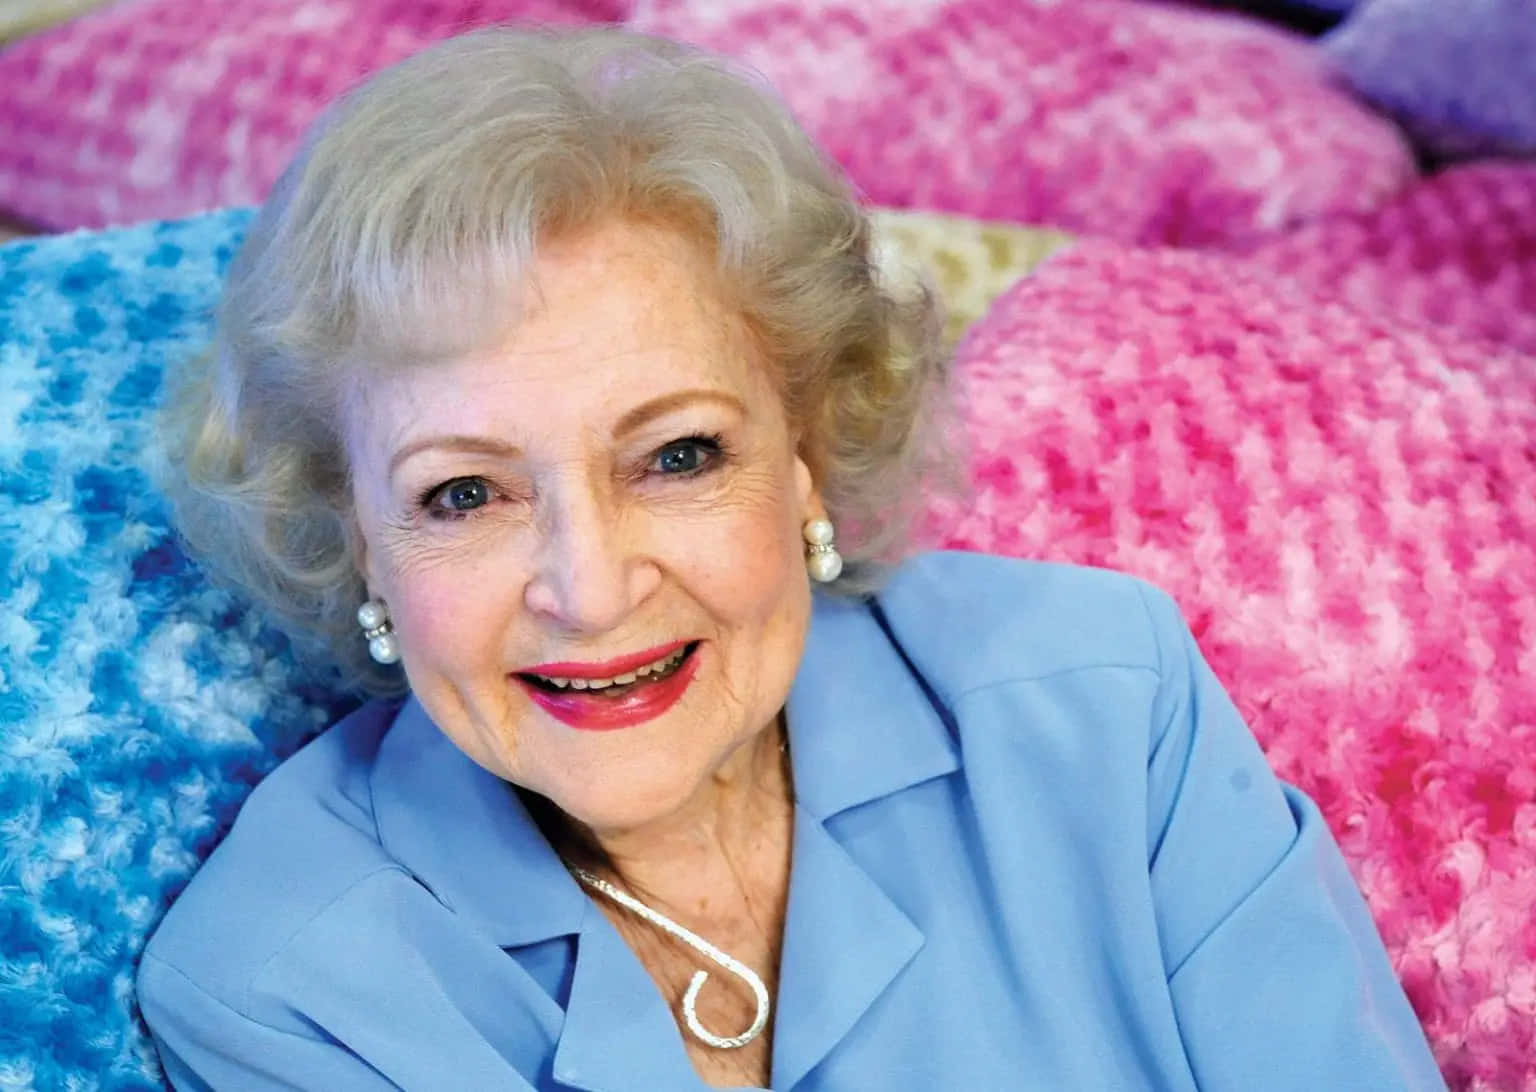 An elegant and charismatic Betty White in a close-up portrait